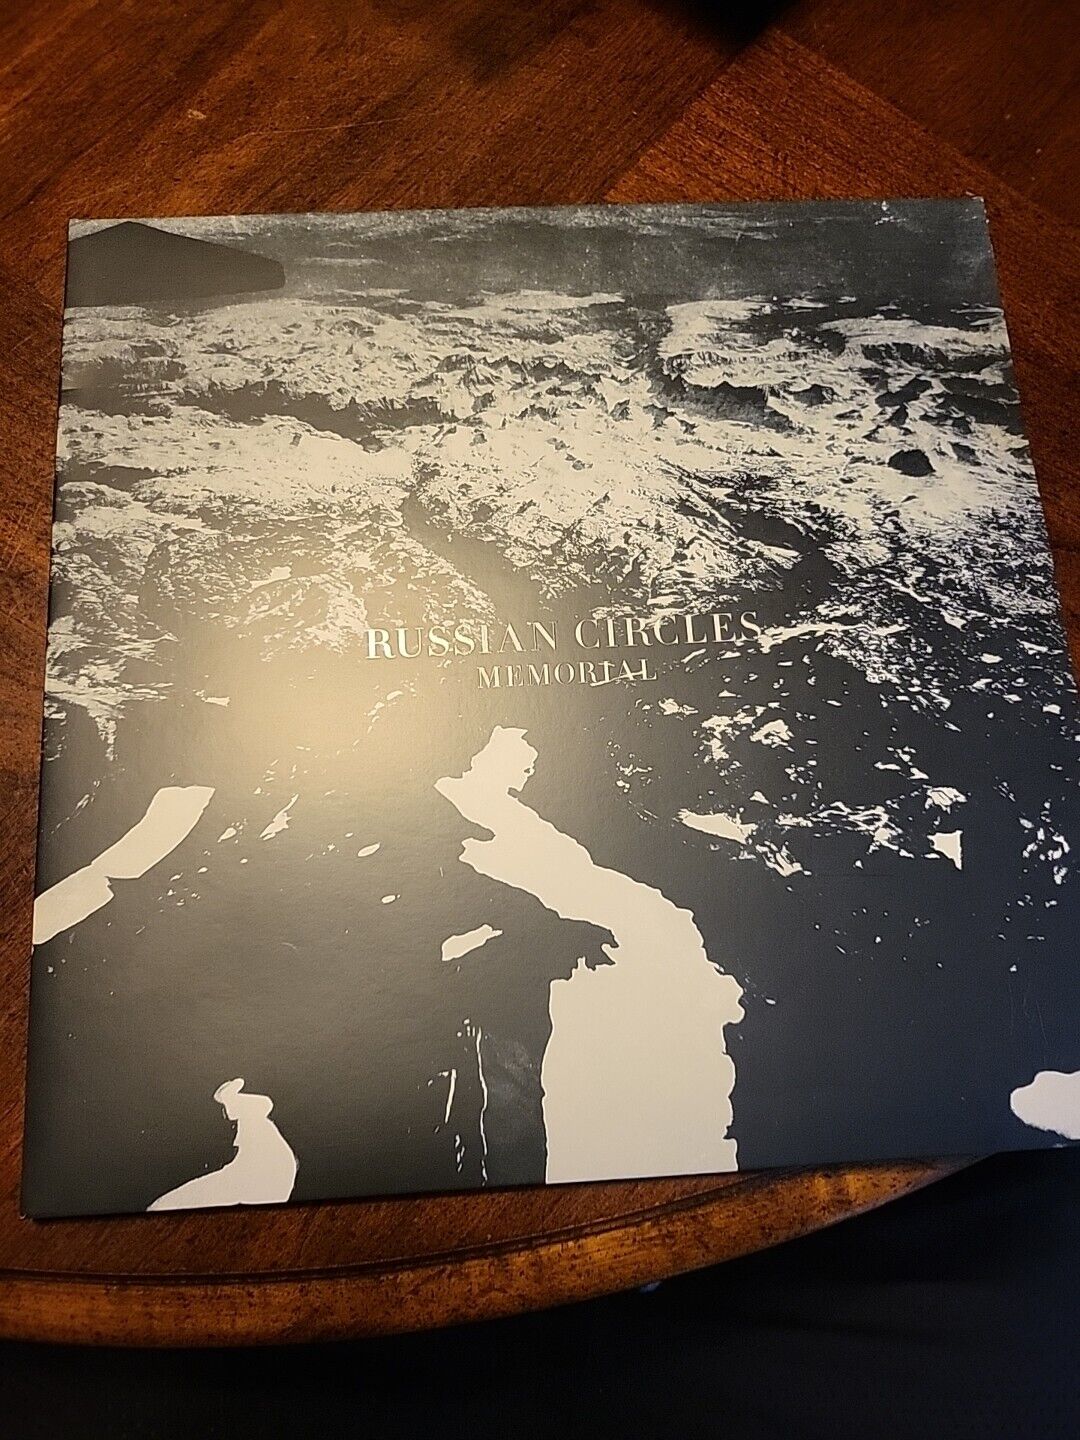 RUSSIAN CIRCLES - MEMORIAL / Vinyl LP limited COLORED CLEAR BLUE